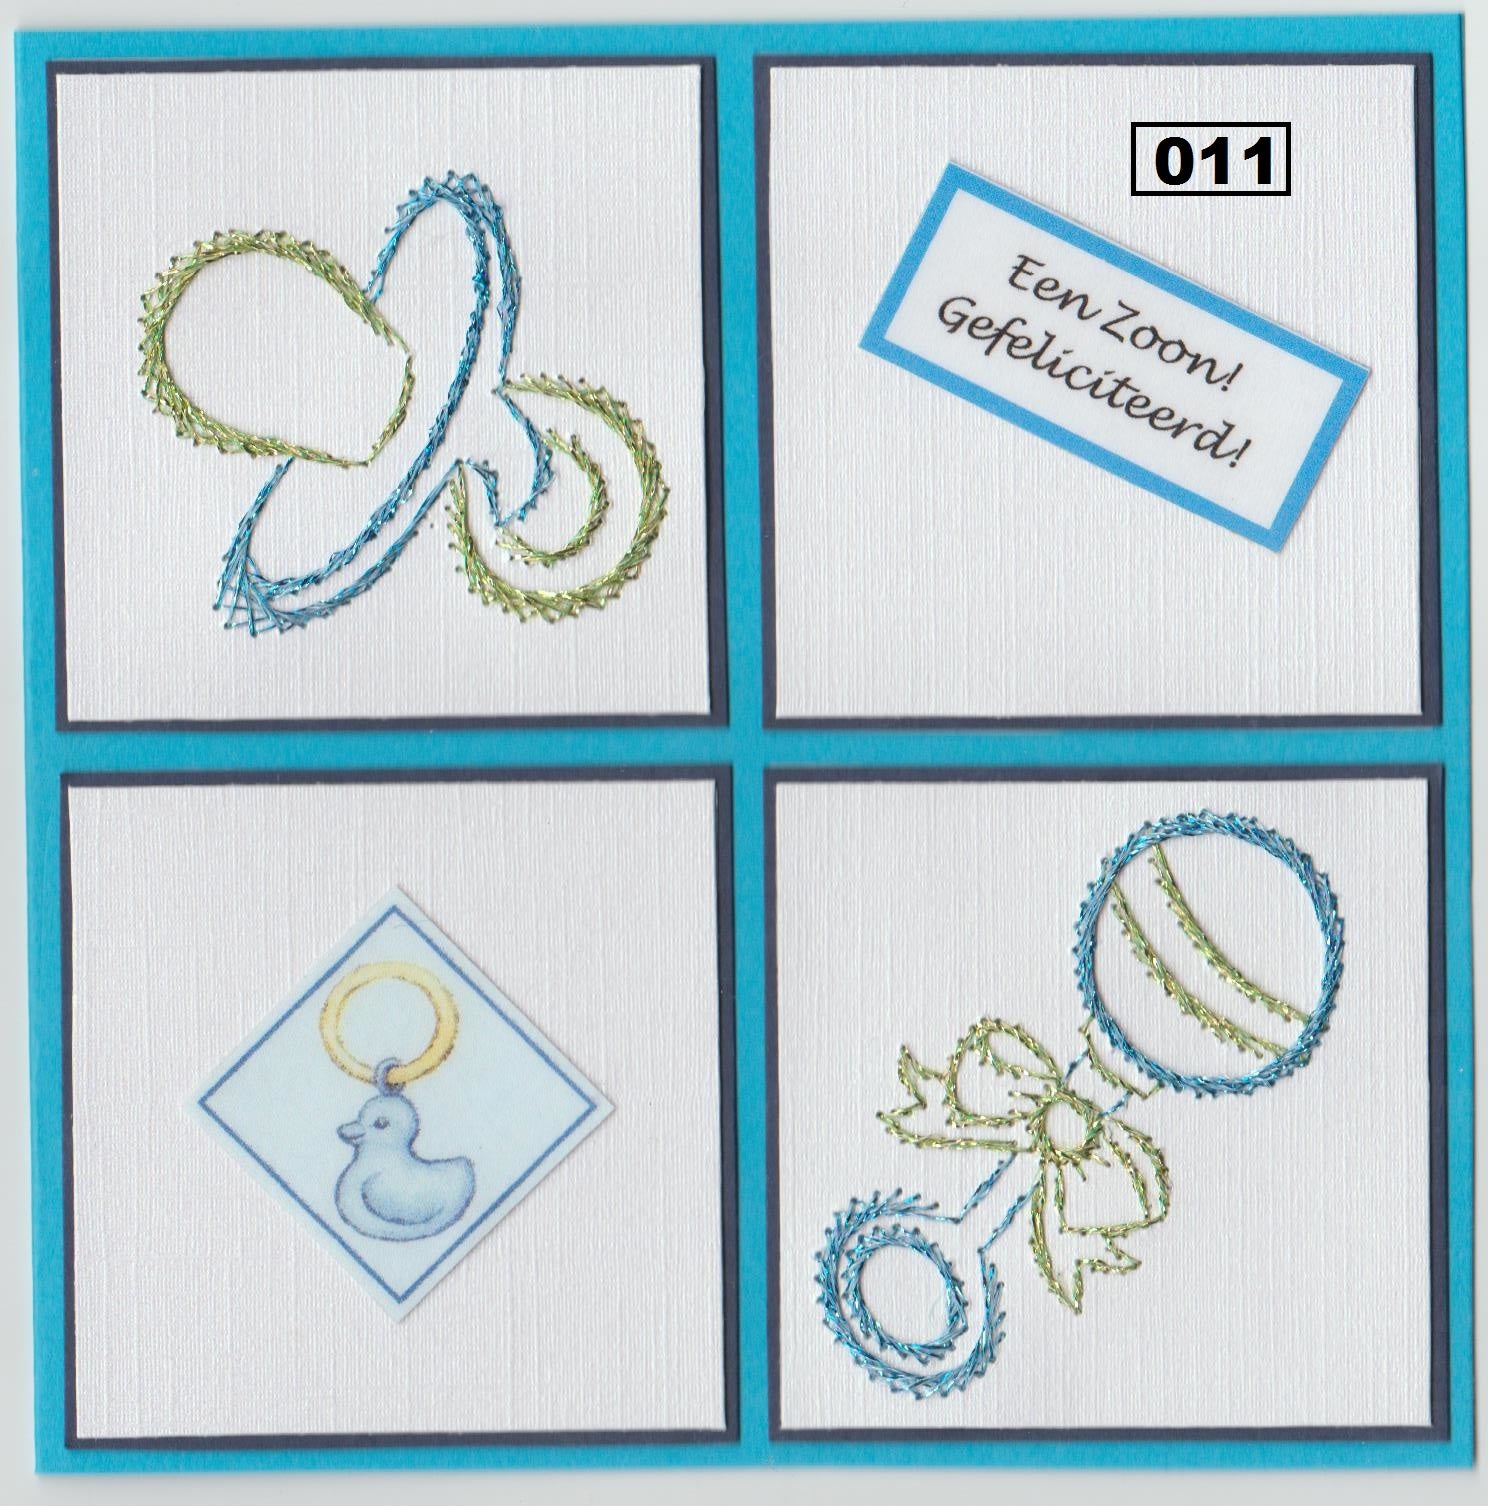 Laura's Design Digital Embroidery Pattern - Baby